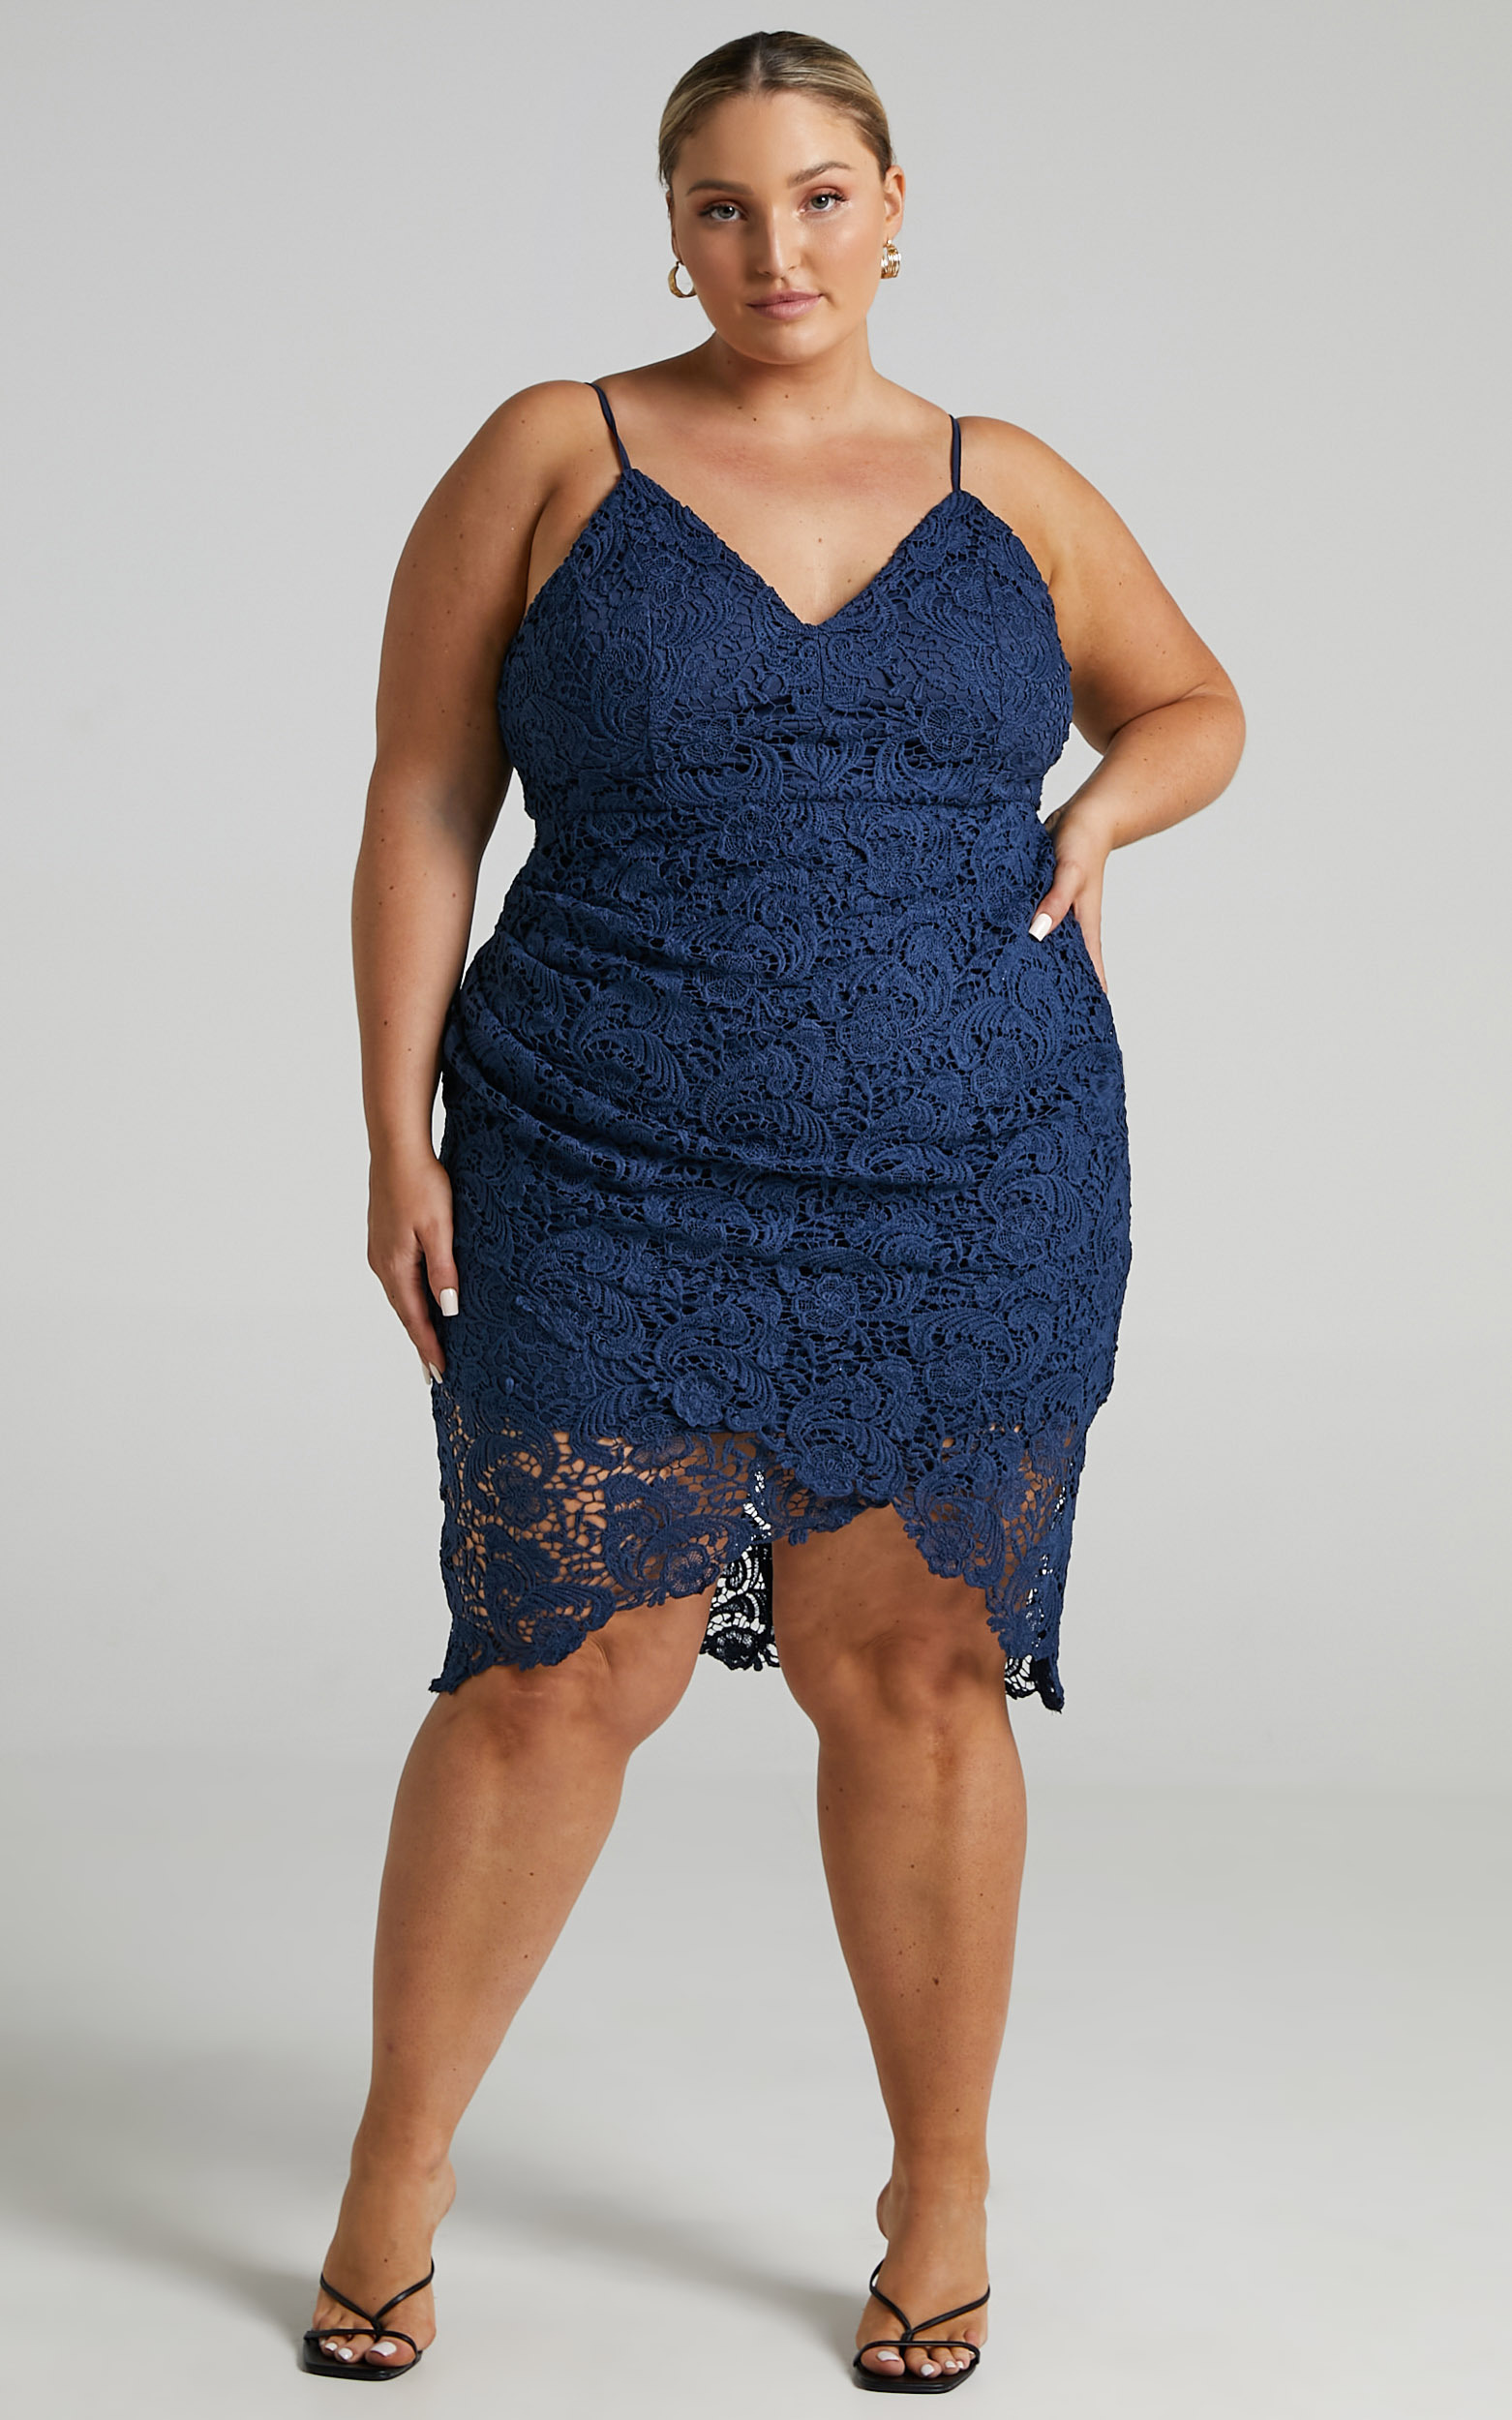 Typical Lover Dress in Navy Lace - 20, NVY4, hi-res image number null